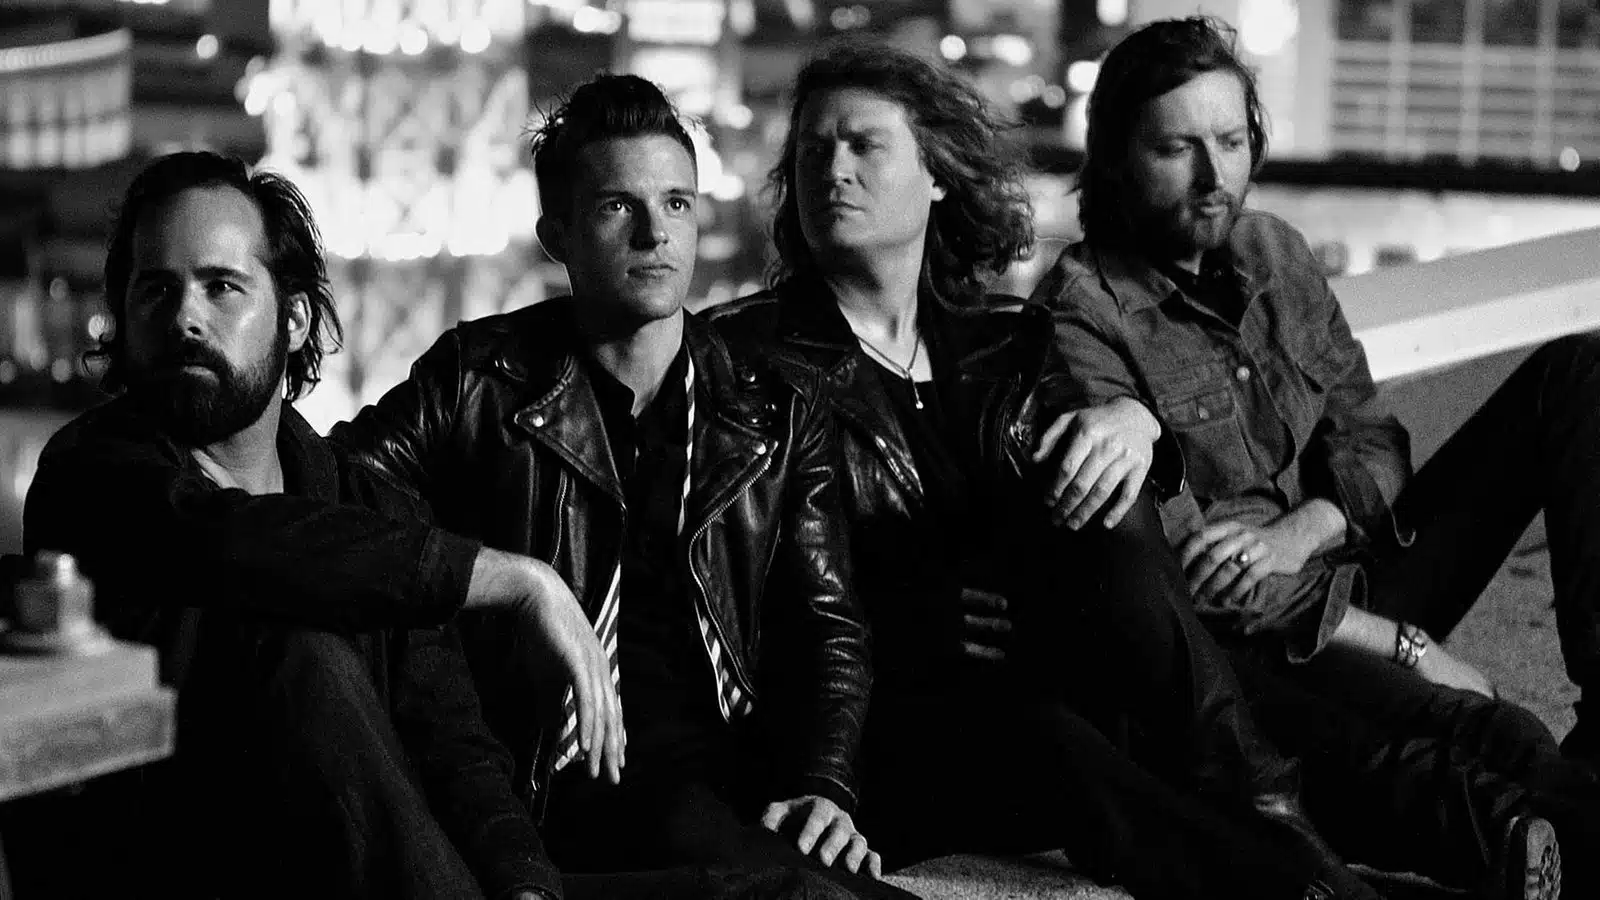 The Killers Songs Ranked